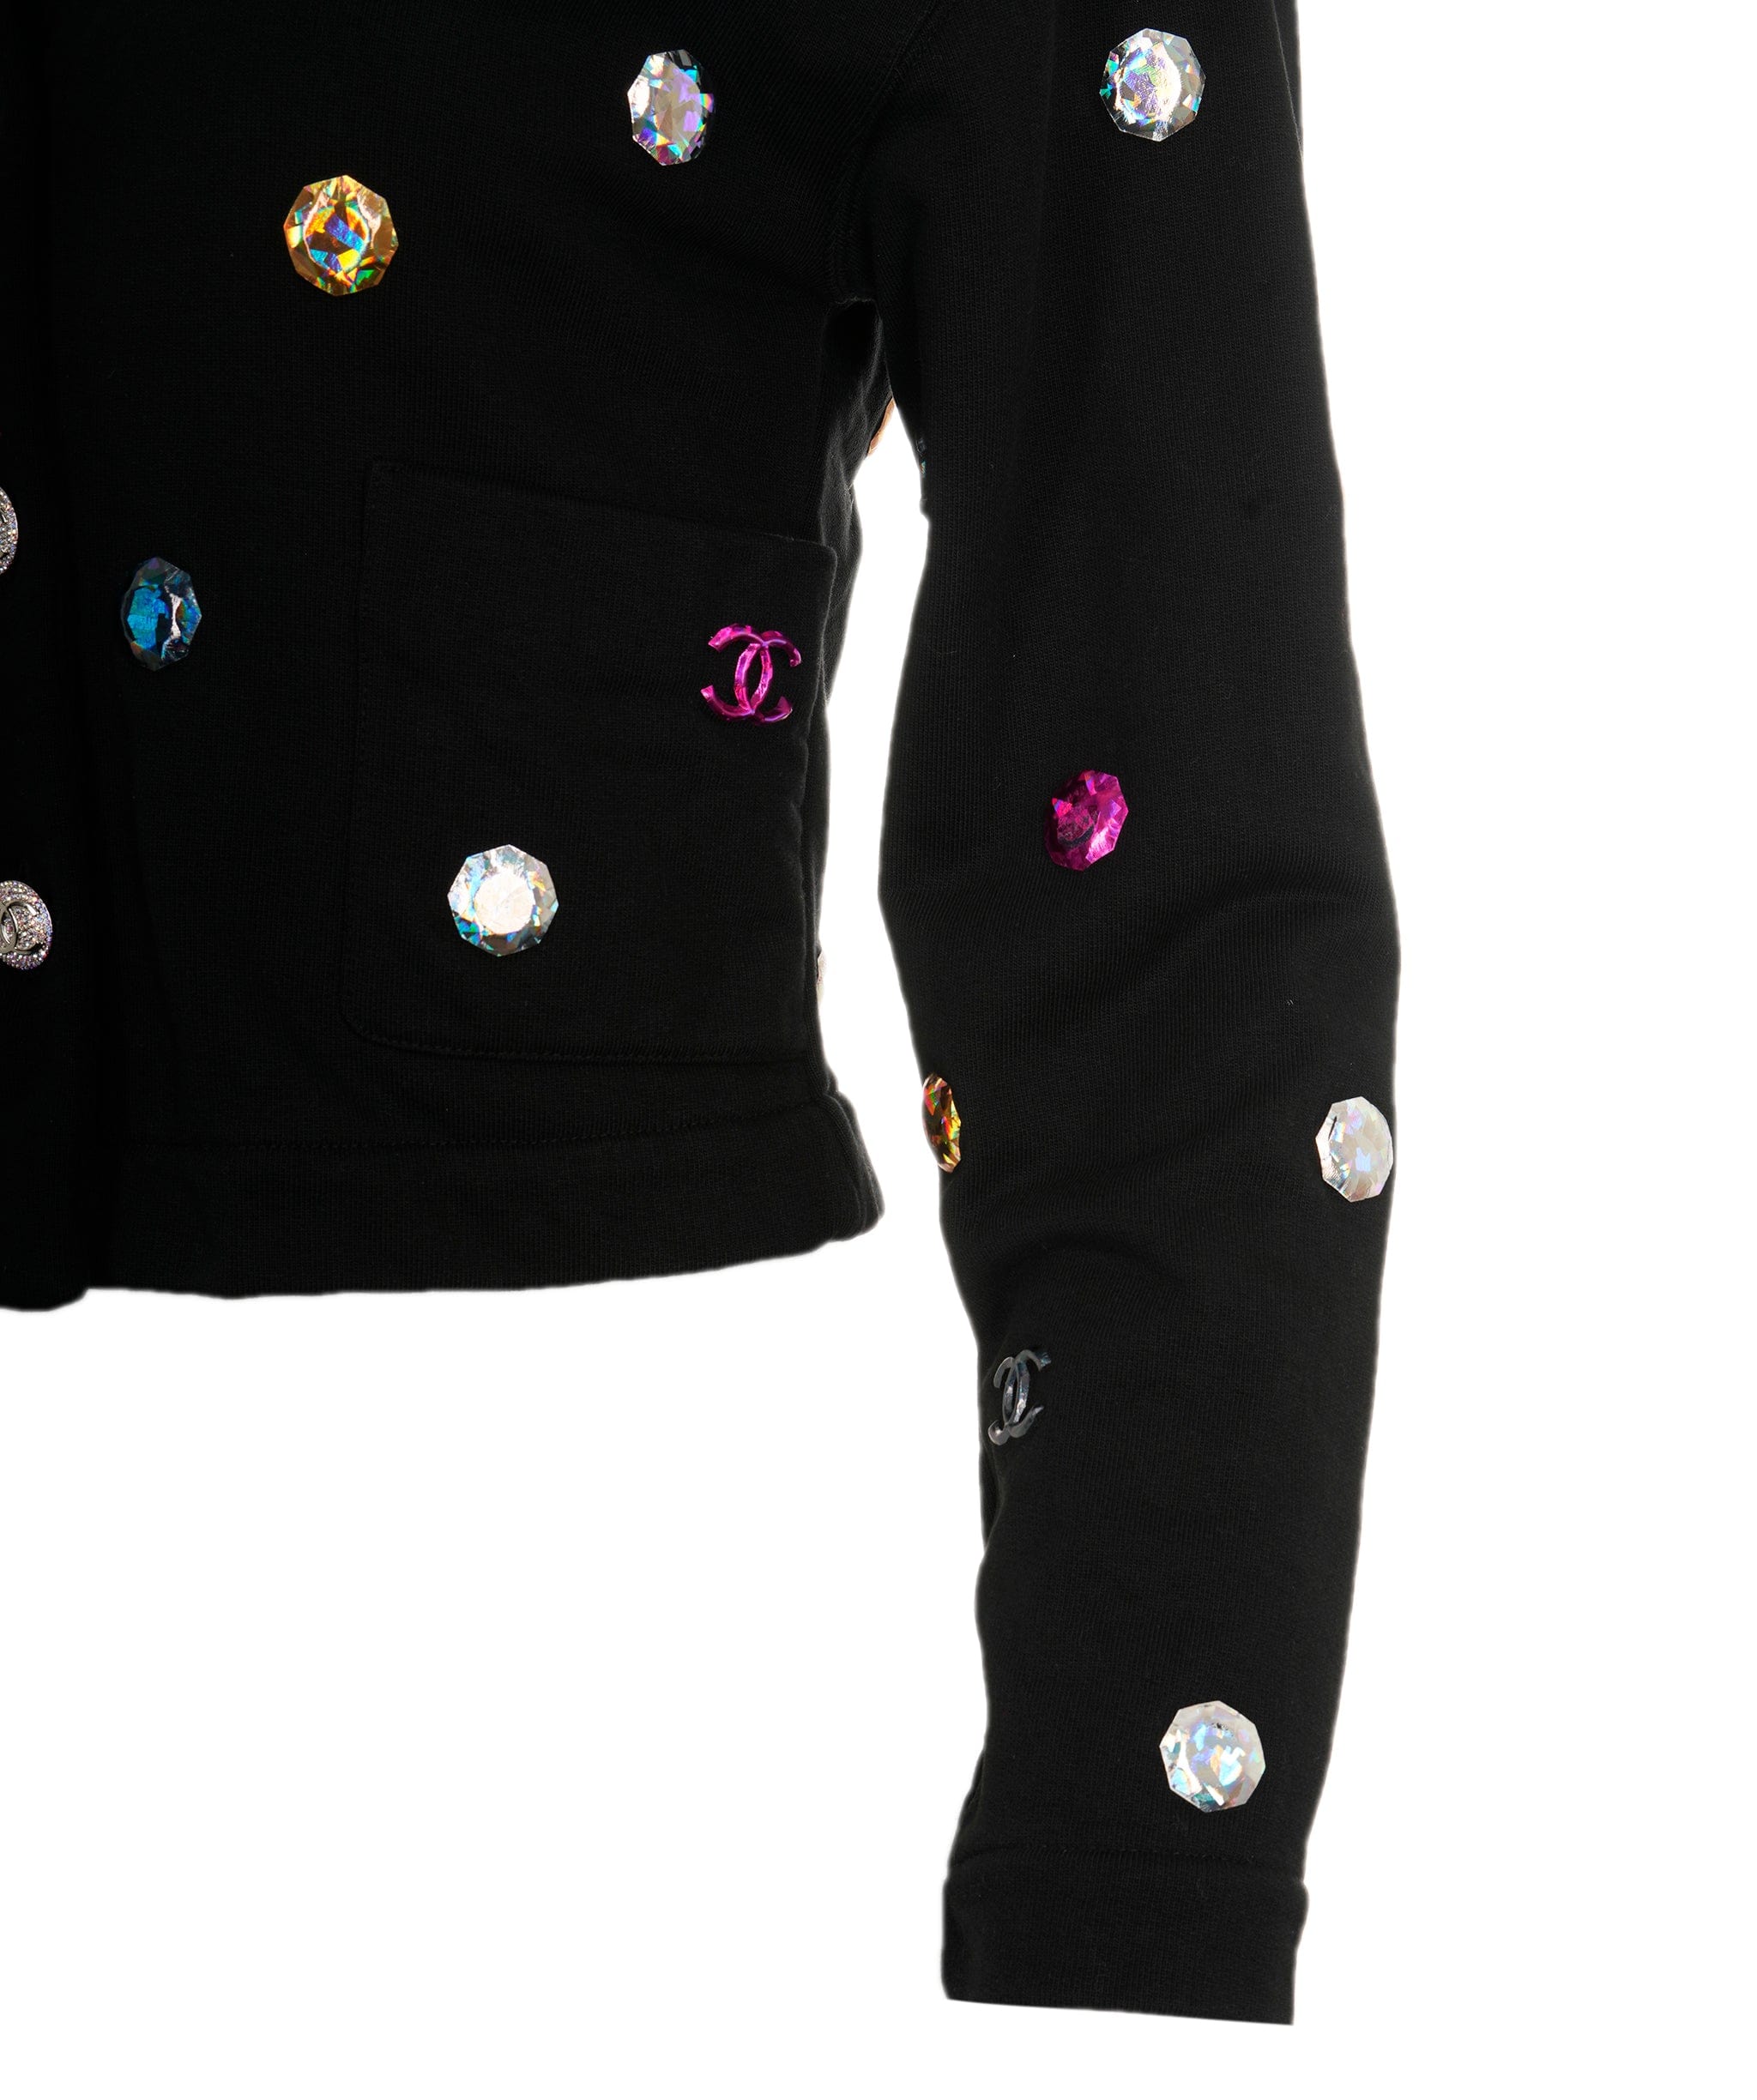 Chanel Chanel Cardigan Black with multicolored patch  FR36 P71493K10289 AVC1849